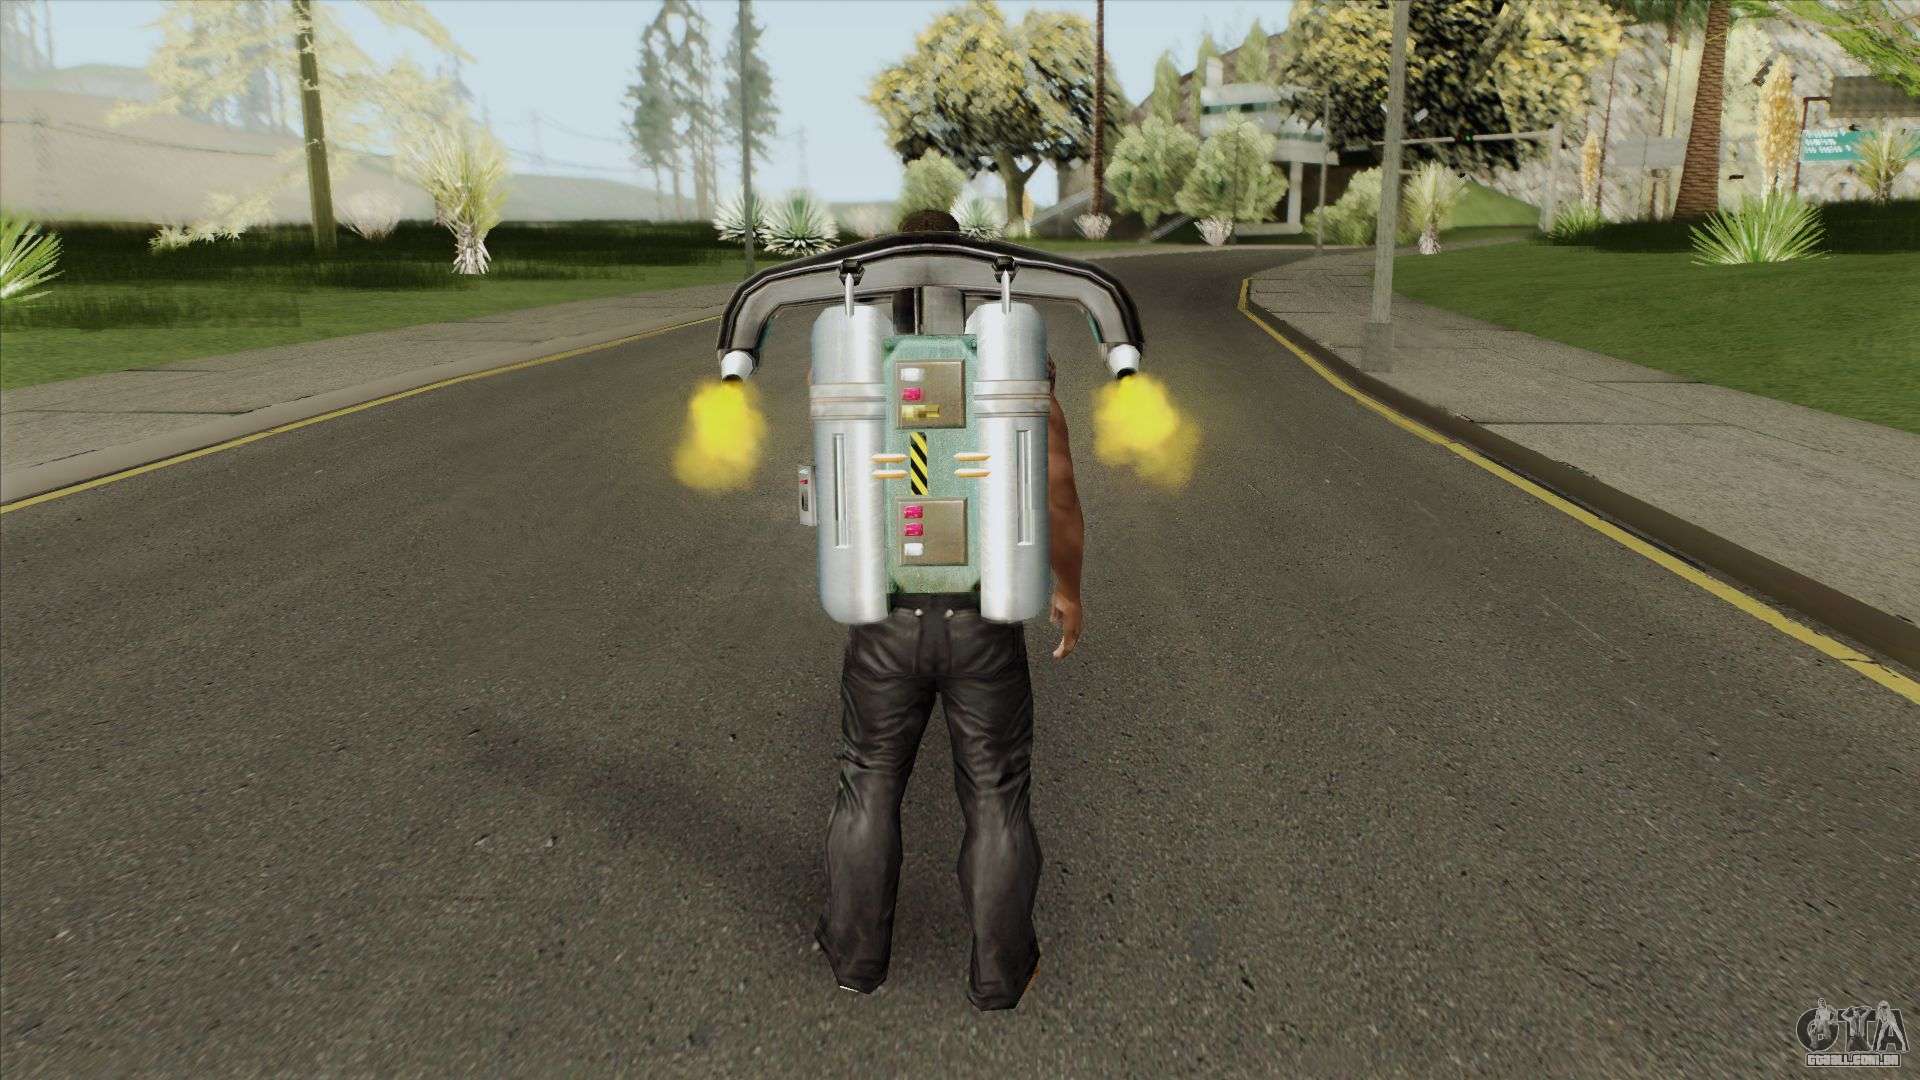 What Is The Cheat For Jetpack In GTA San Andreas